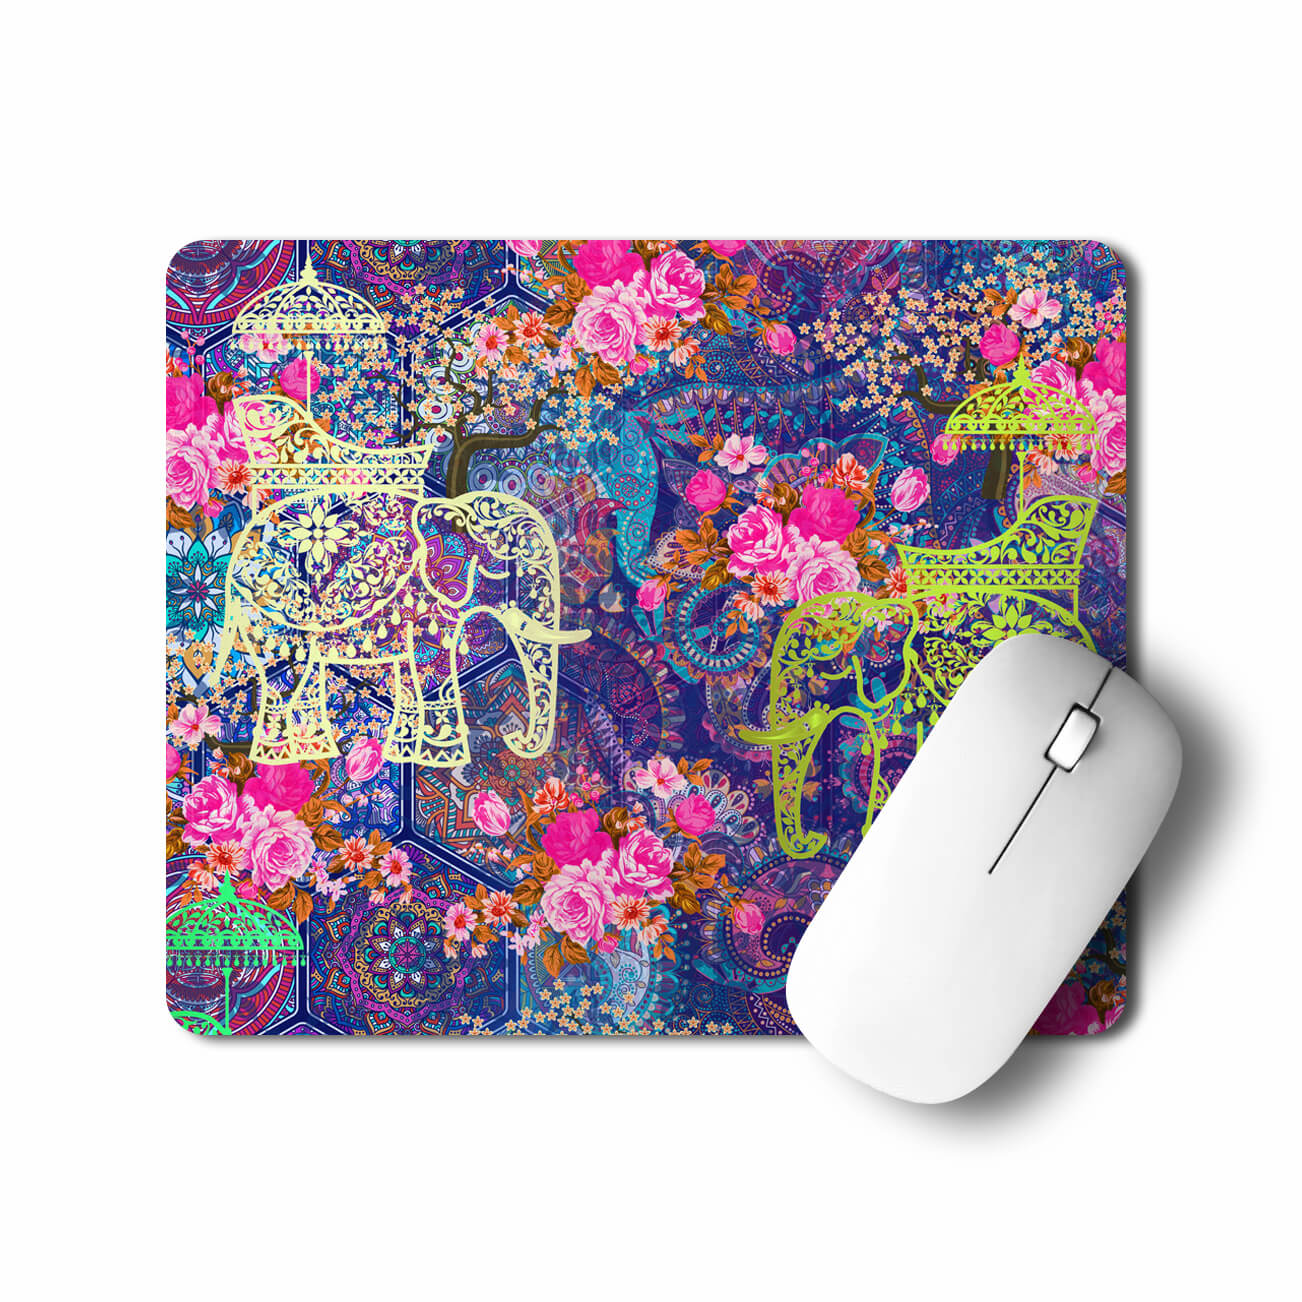 Buy Office Mouse Pads Online